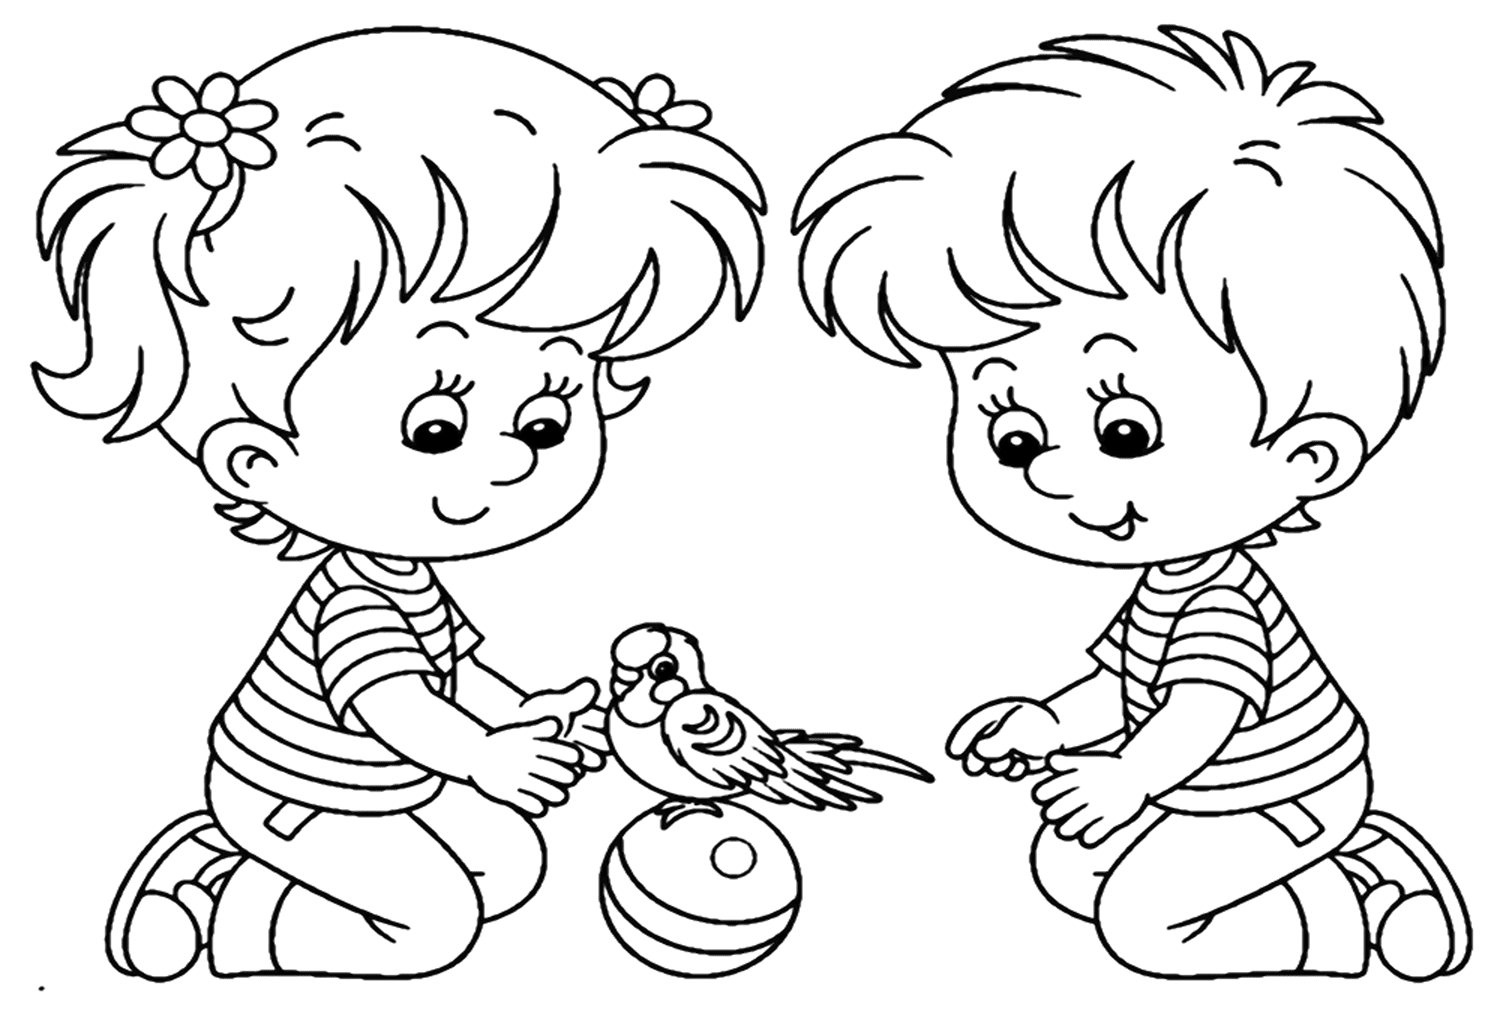 Kids With Parakeet Coloring Page from Parakeet